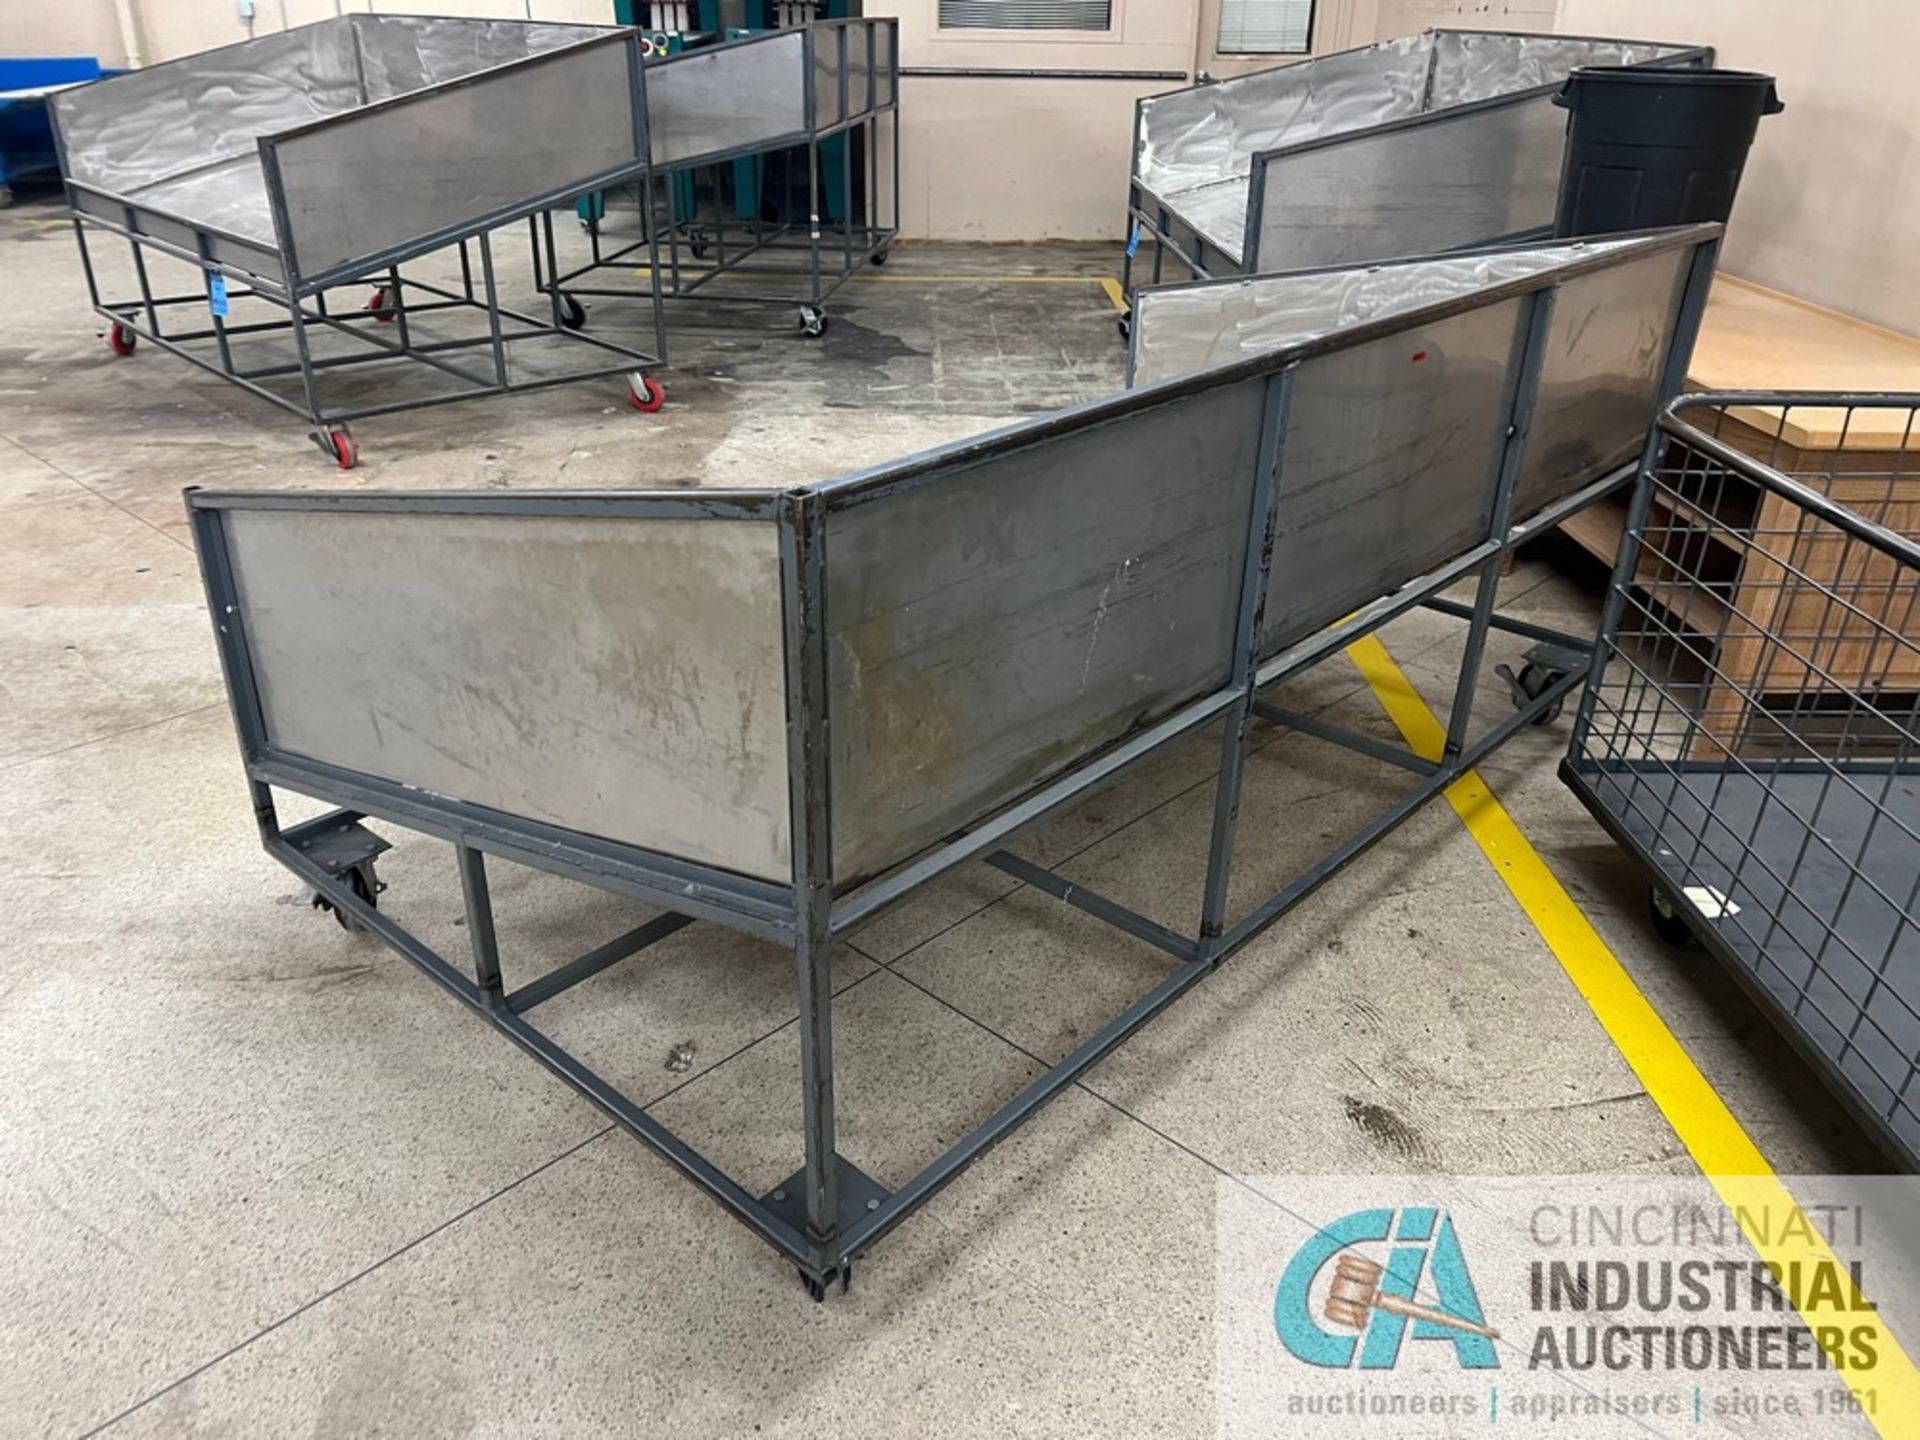 52" X 93" LONG X 17" HIGH STAINLESS STEEL TUB STEEL FRAME SORTING CART, 44" OVERALL HEIGHT - Image 3 of 3